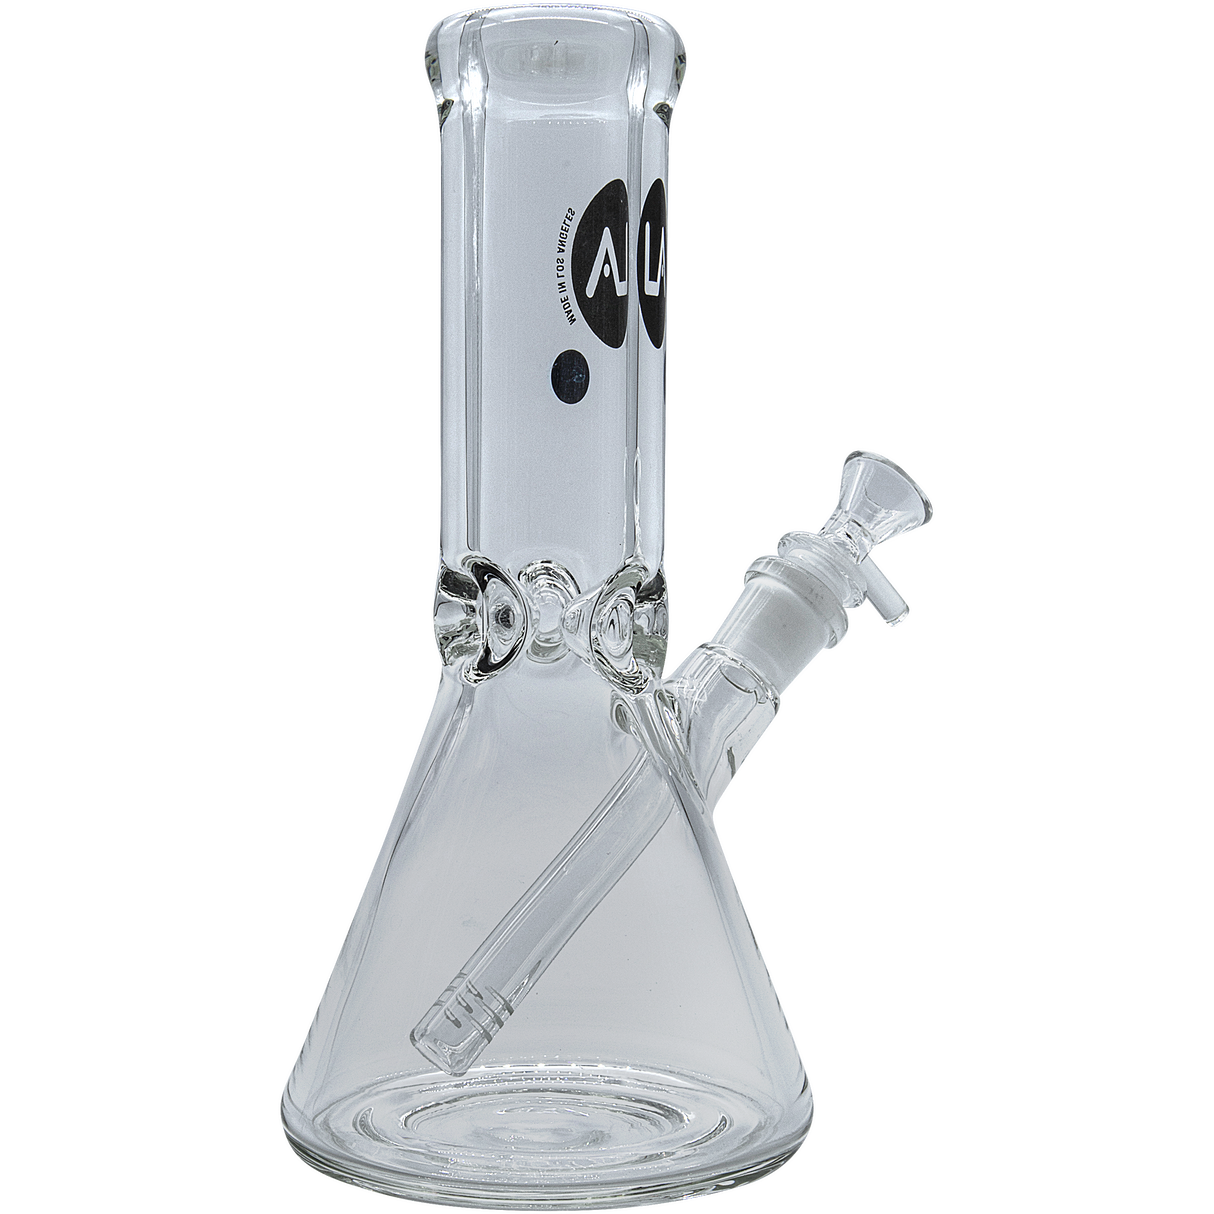 LA Pipes "Agent Stout" Beaker Bong, 9mm thick borosilicate glass, 45-degree joint, front view